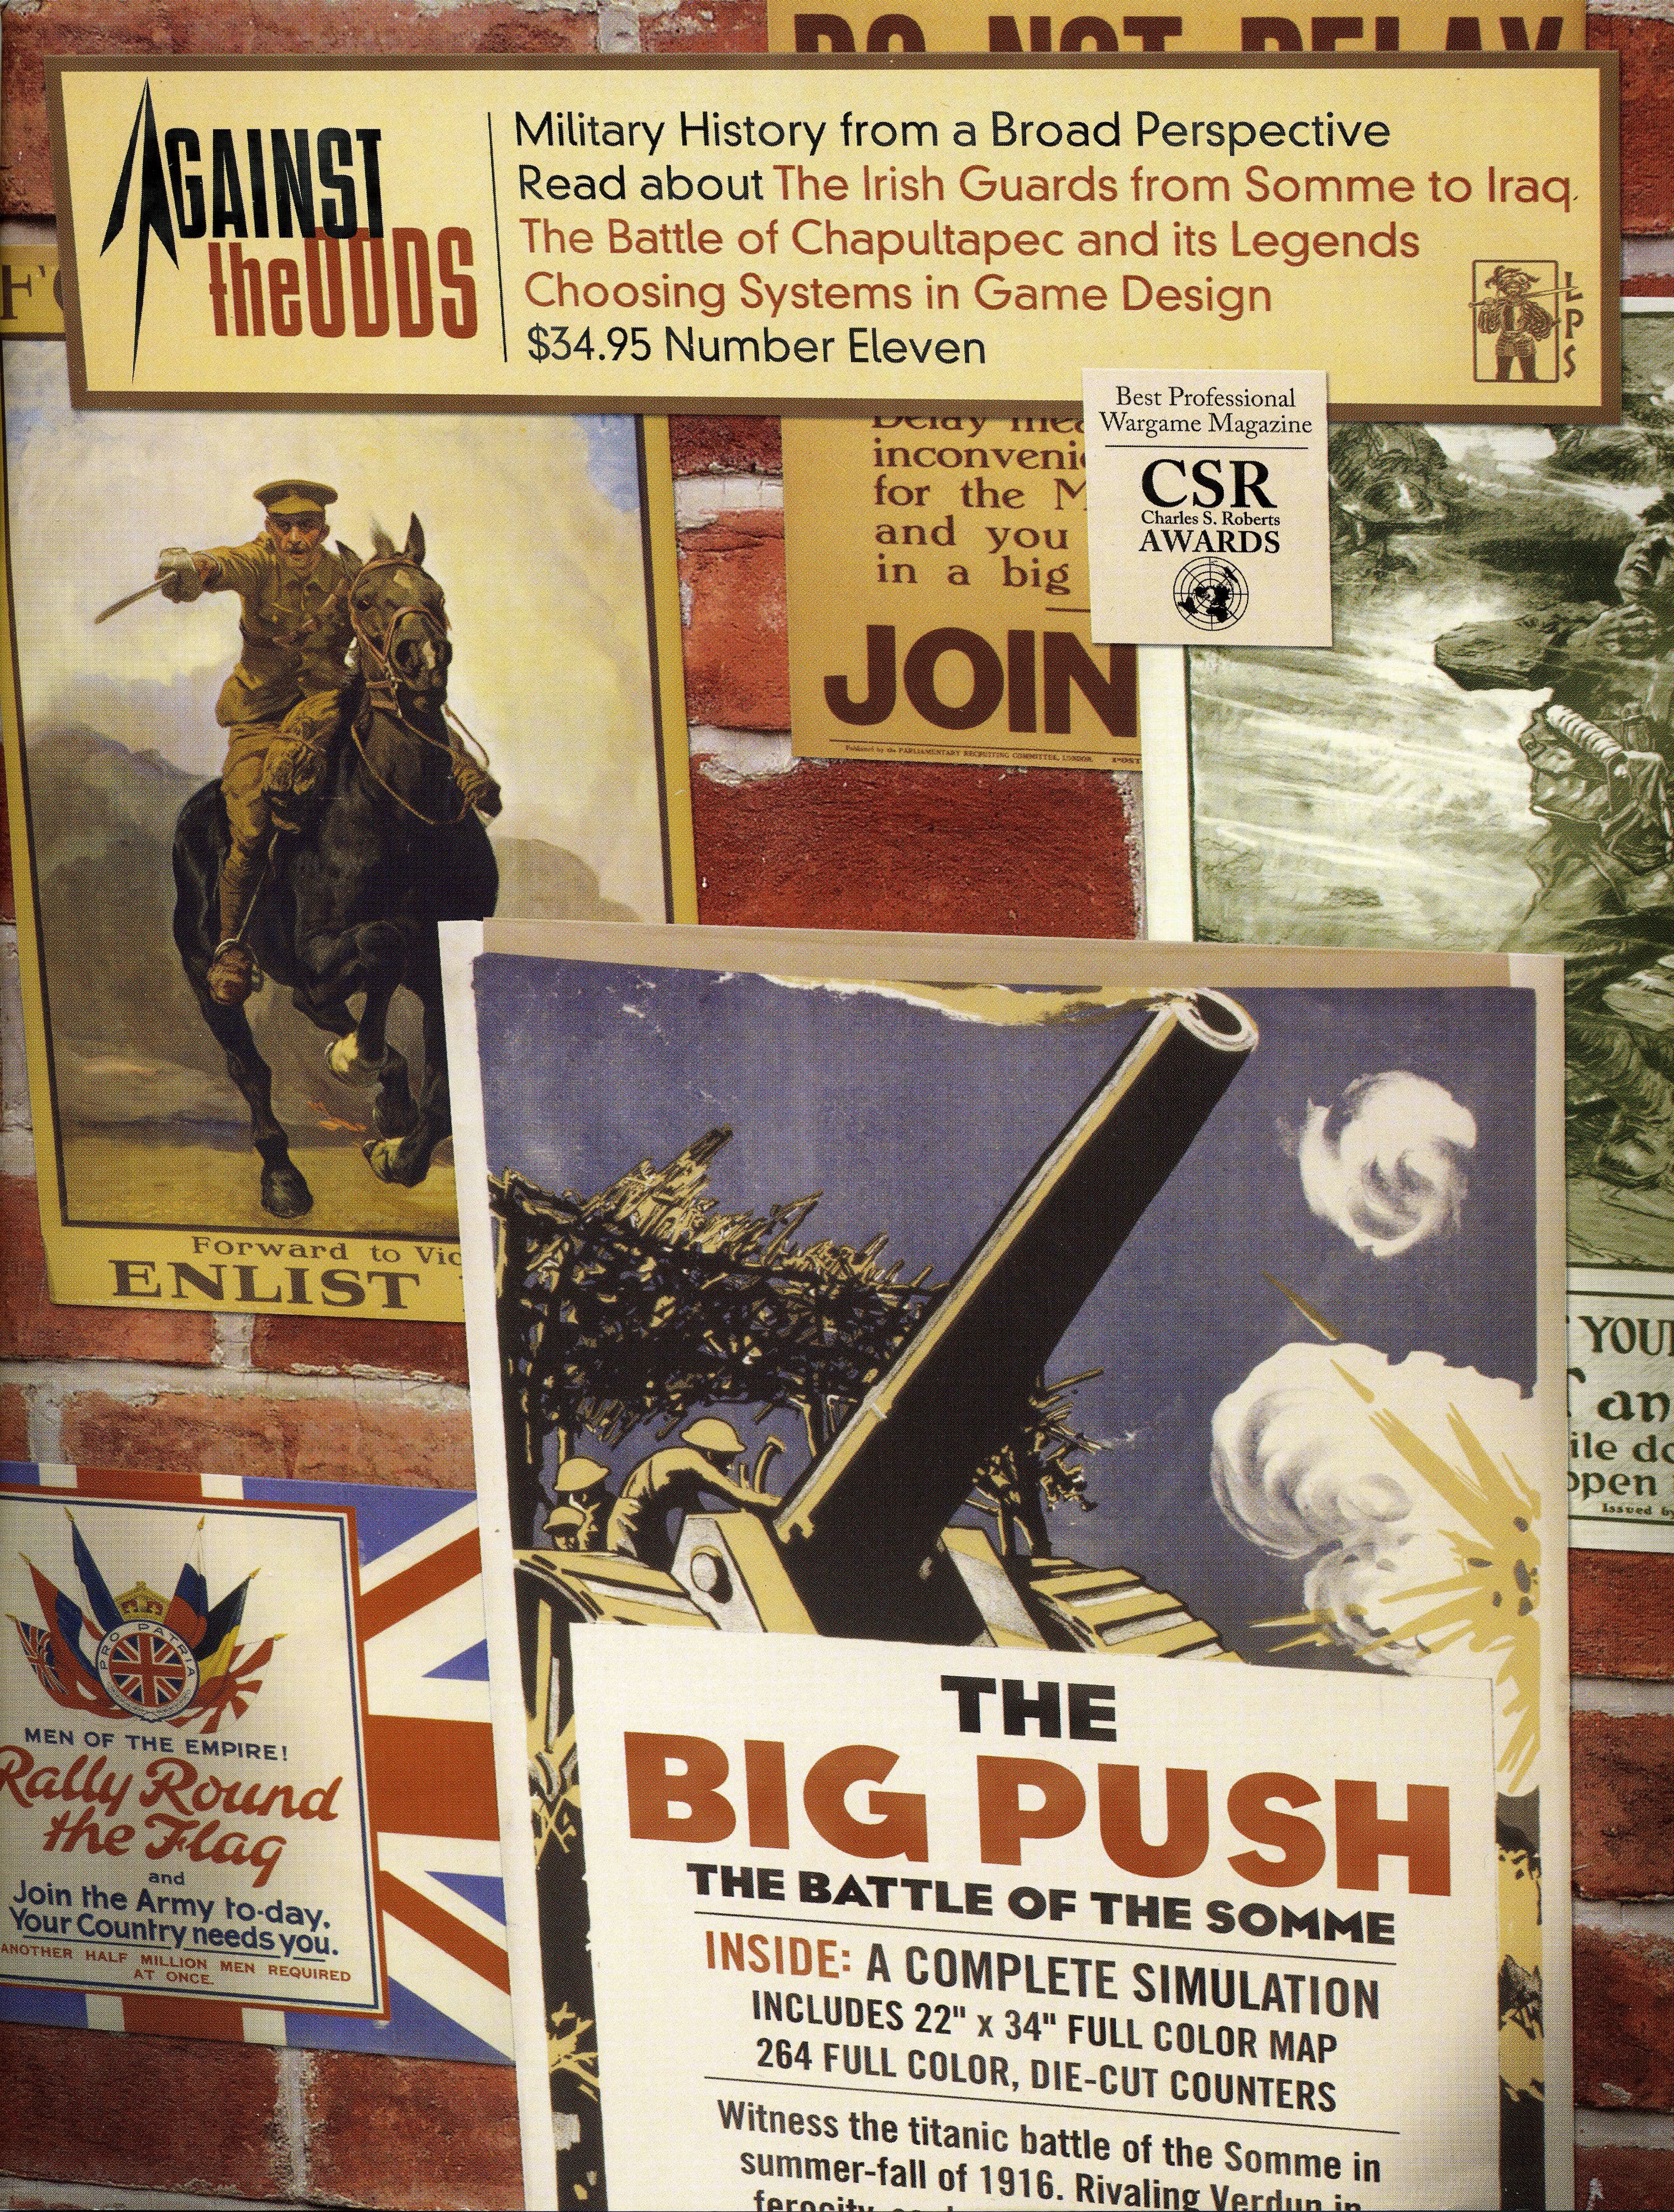 The Big Push: The Battle of the Somme